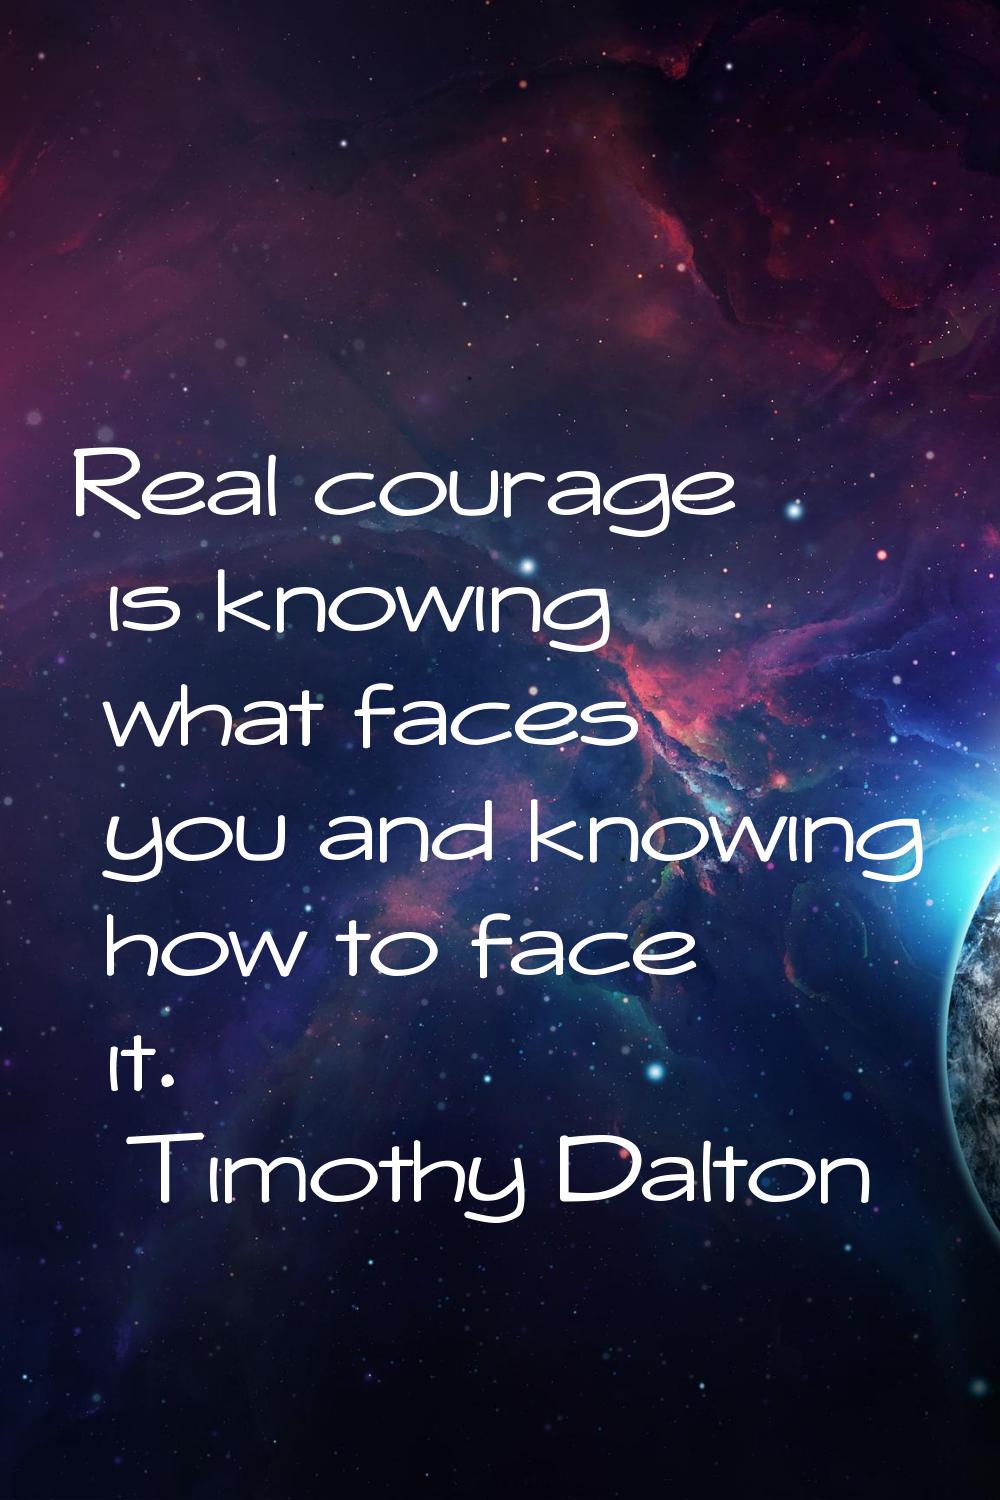 Real courage is knowing what faces you and knowing how to face it.